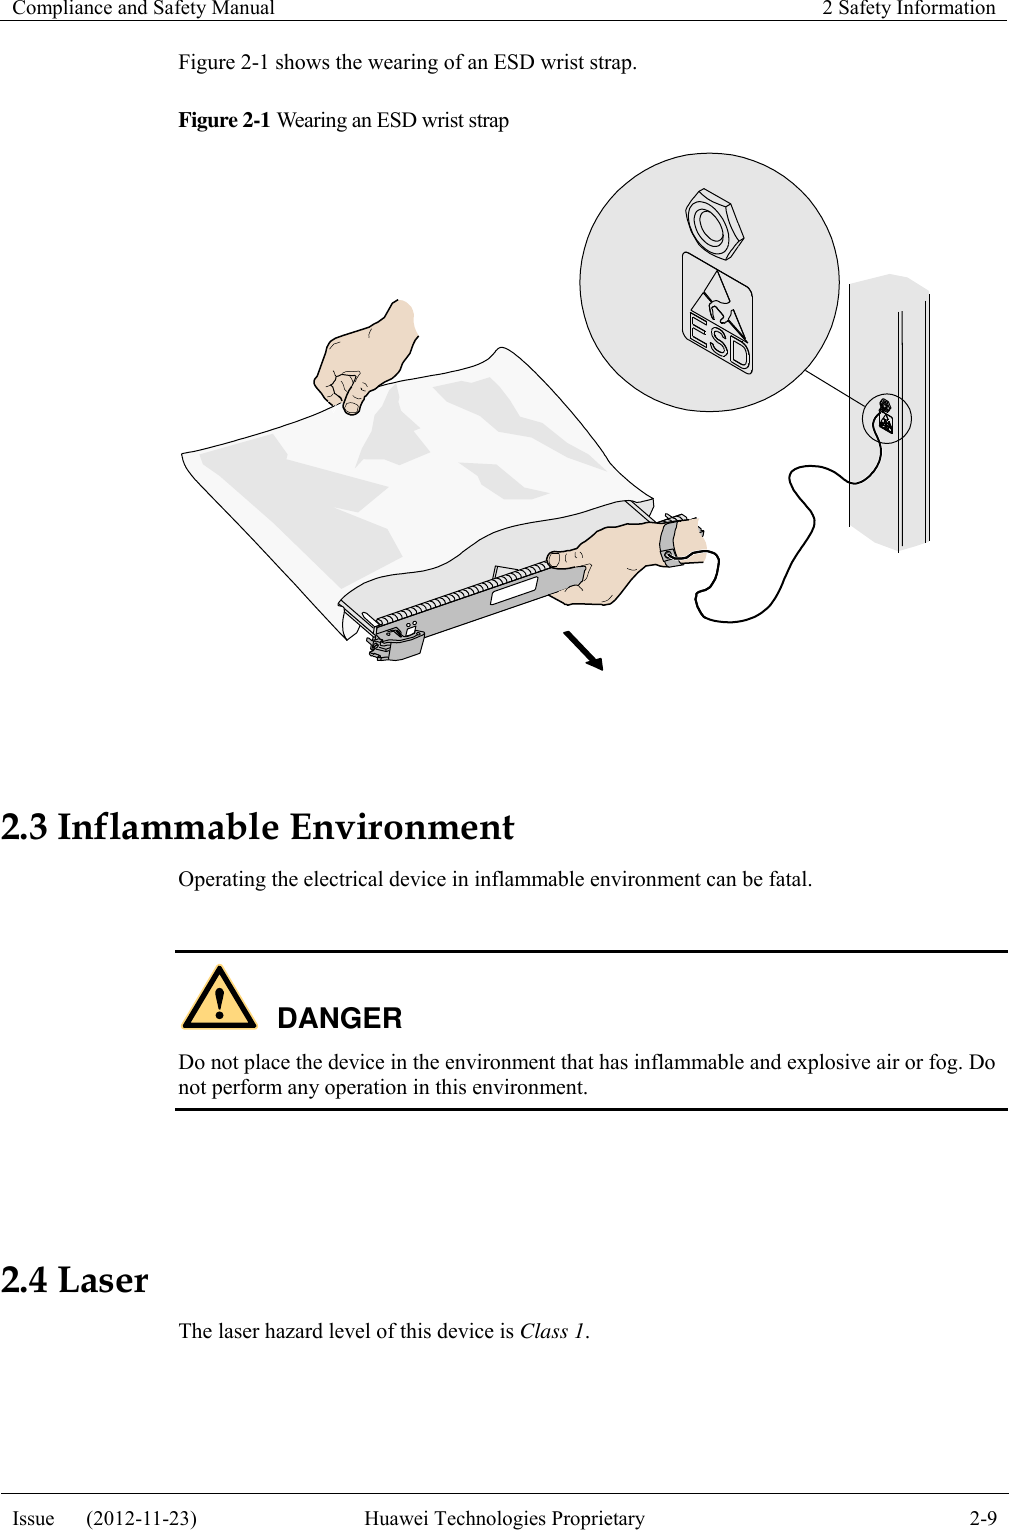 Compliance and Safety Manual 2 Safety Information  Issue      (2012-11-23) Huawei Technologies Proprietary 2-9  Figure 2-1 shows the wearing of an ESD wrist strap. Figure 2-1 Wearing an ESD wrist strap   2.3 Inflammable Environment Operating the electrical device in inflammable environment can be fatal.  DANGER Do not place the device in the environment that has inflammable and explosive air or fog. Do not perform any operation in this environment.   2.4 Laser The laser hazard level of this device is Class 1.  